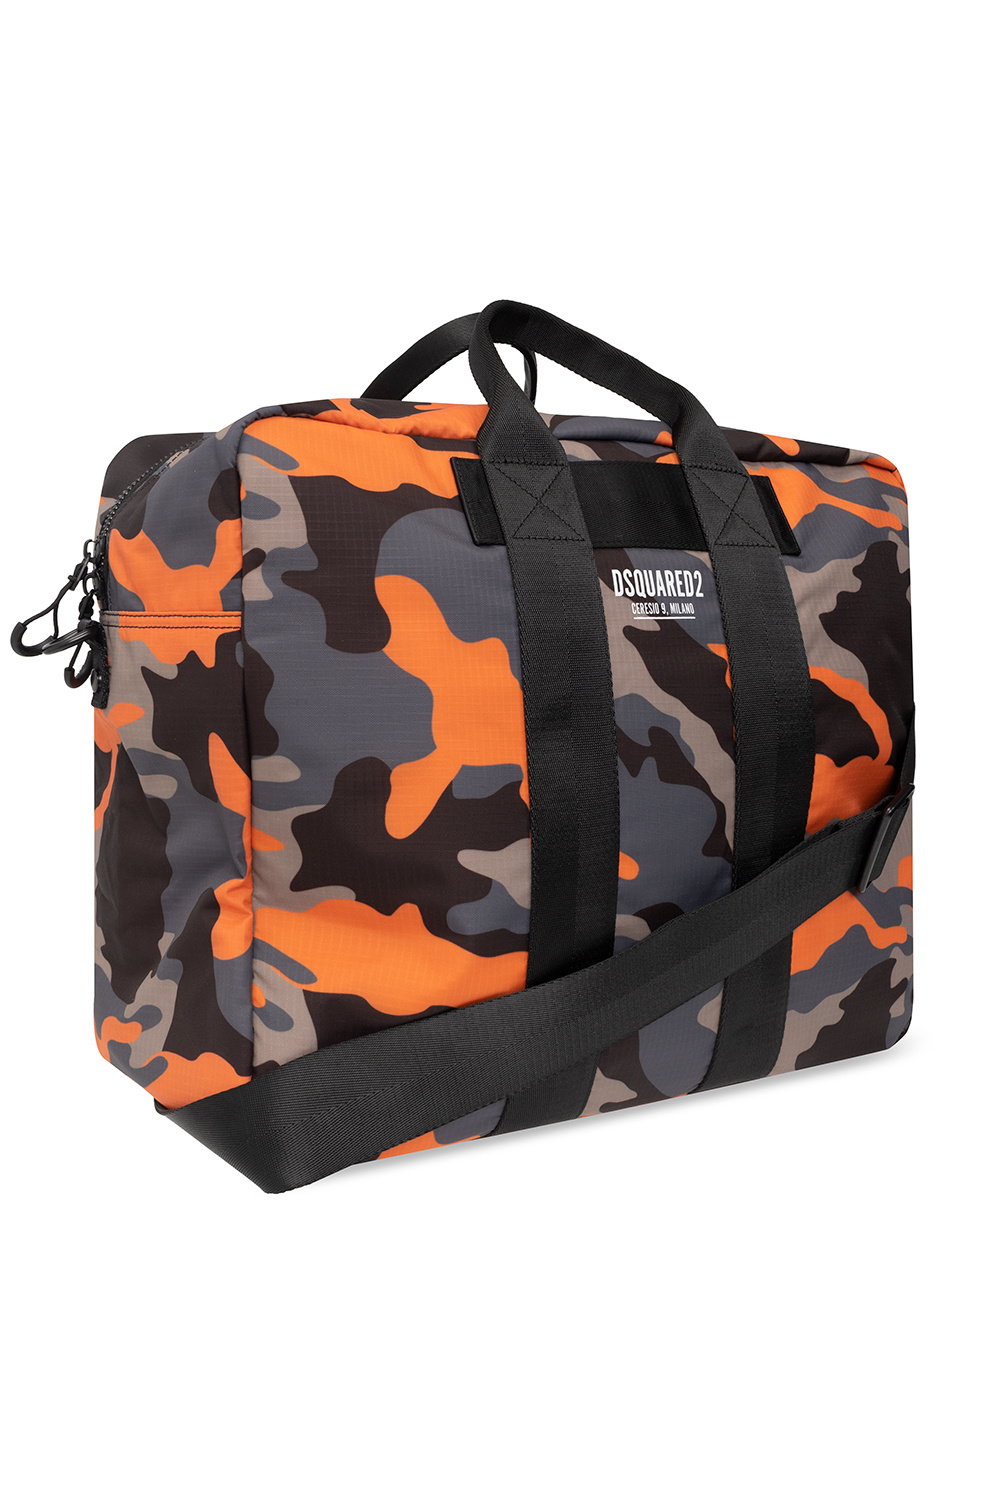 Dsquared2 'Ceresio 9’ holdall